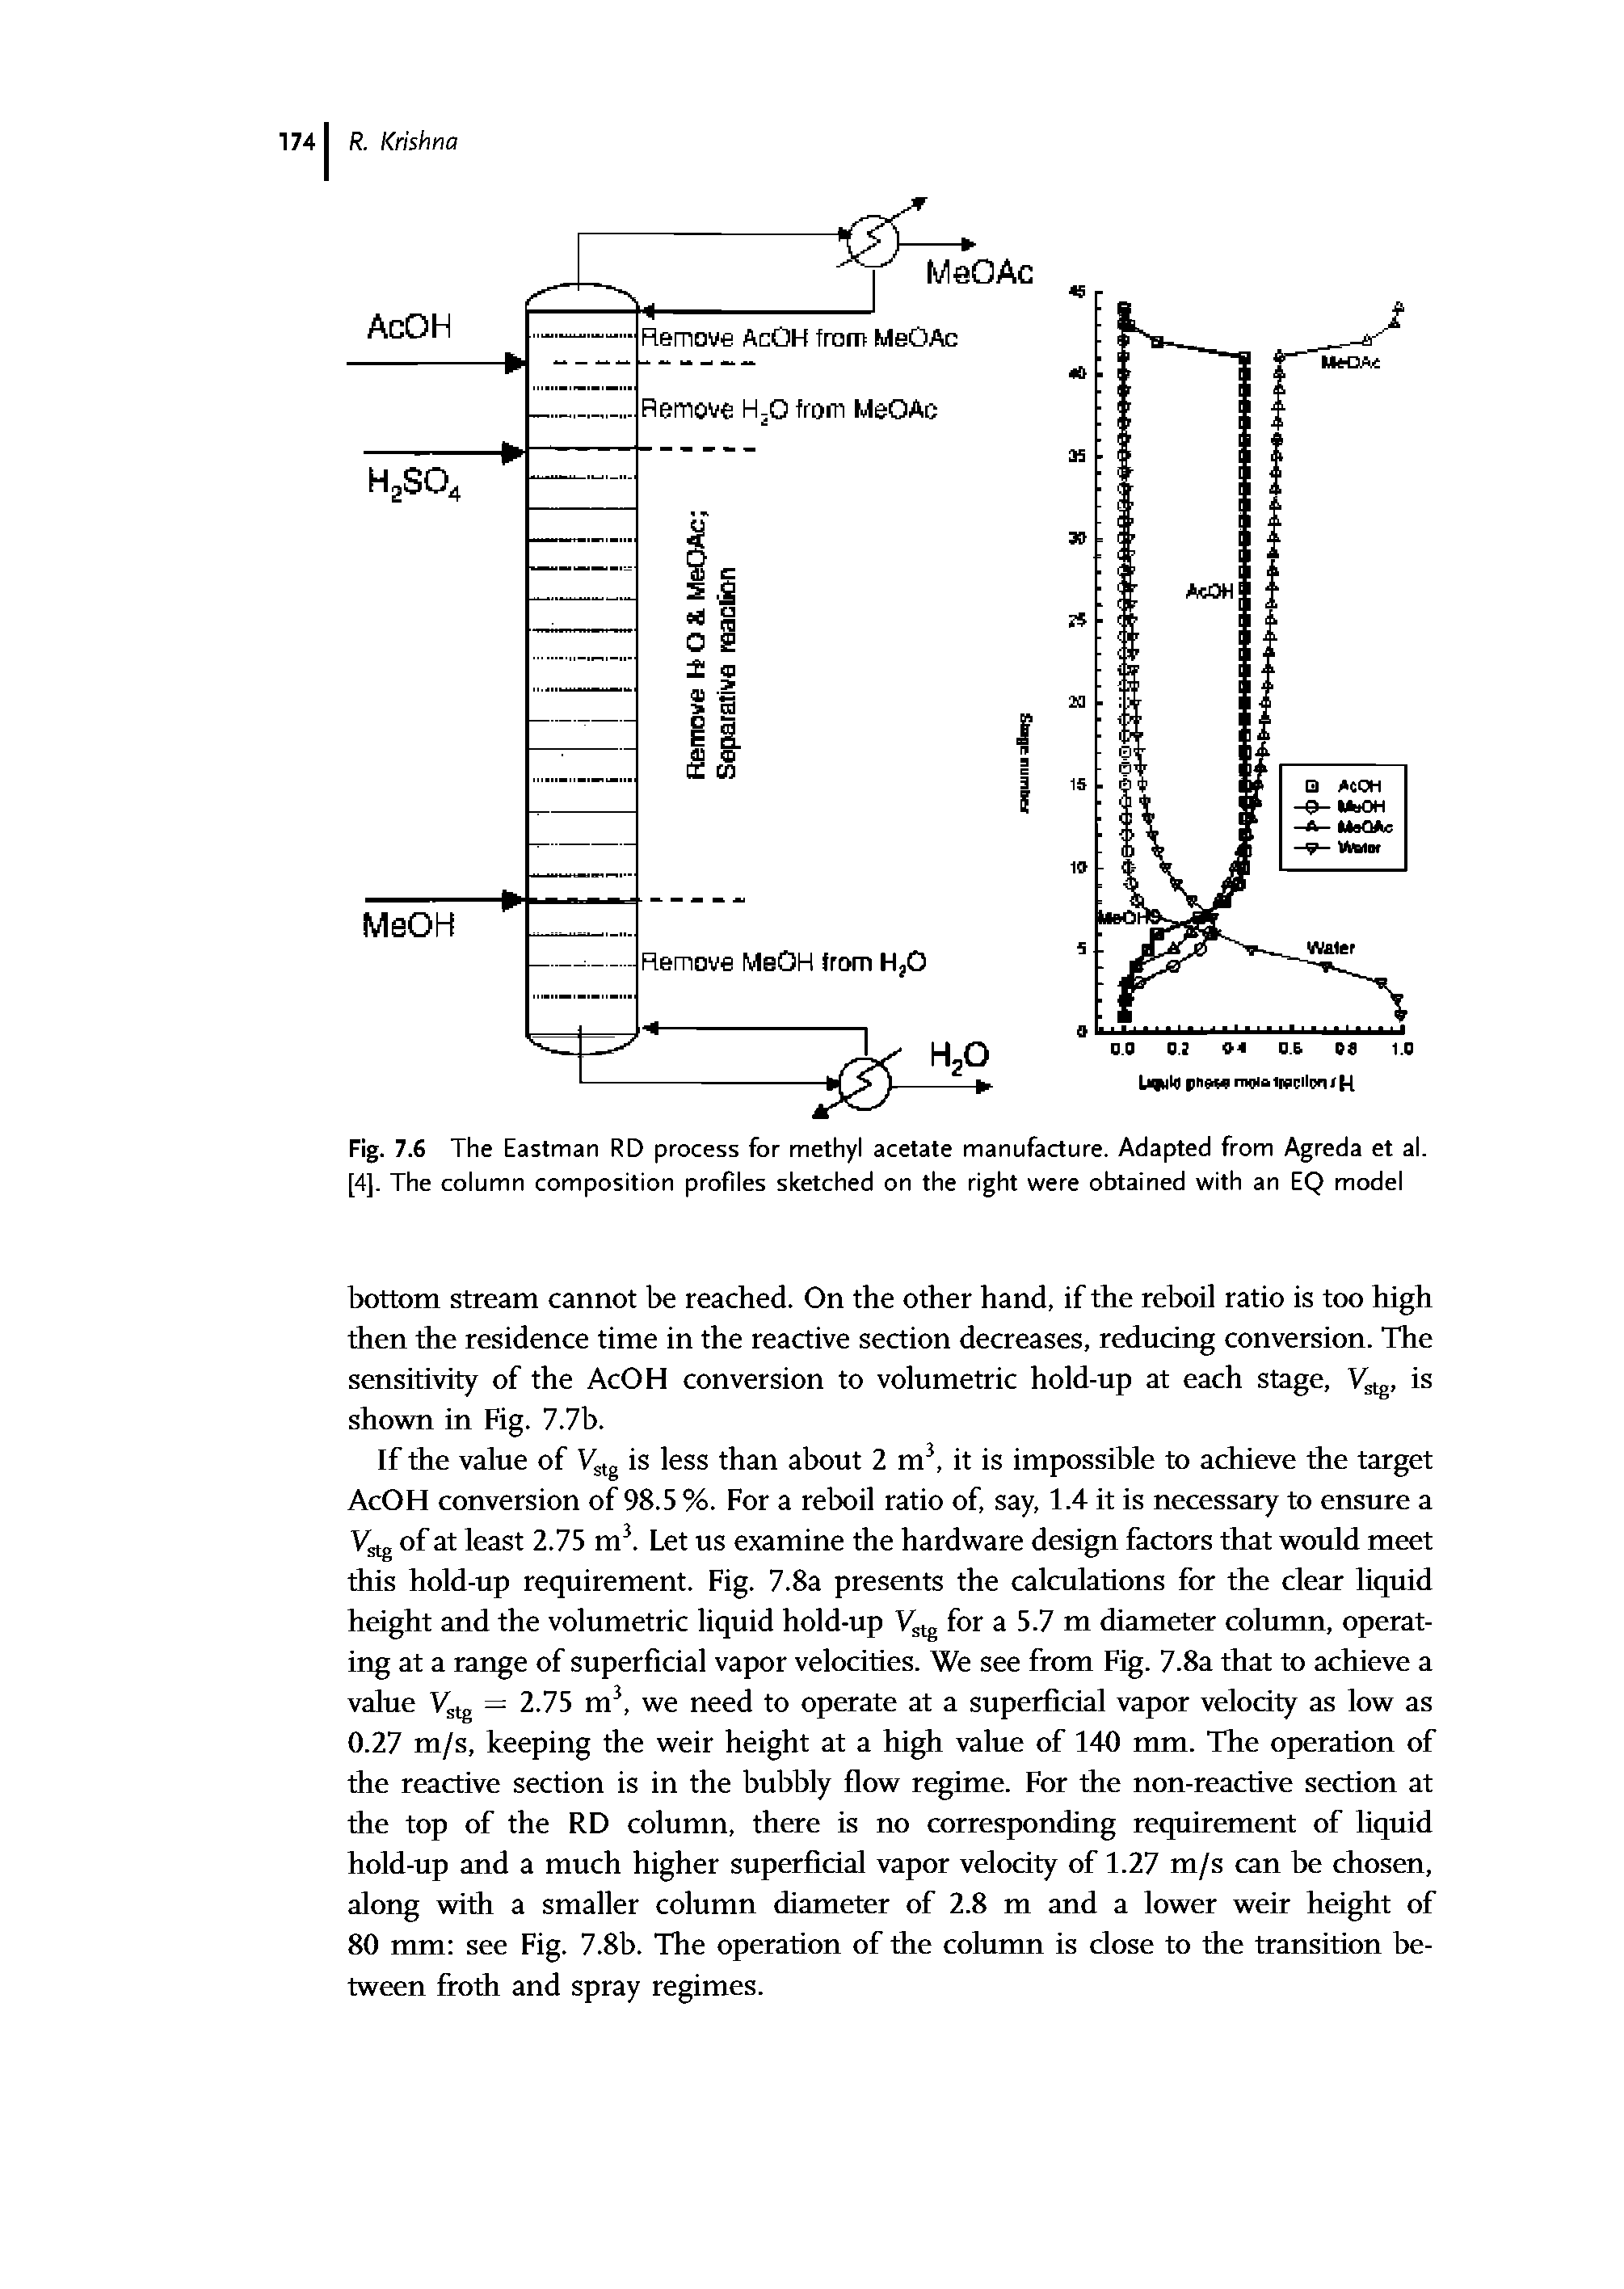 Fig. 7.6 The Eastman RD process for methyl acetate manufacture. Adapted from Agreda et al. [4], The column composition profiles sketched on the right were obtained with an EQ model...